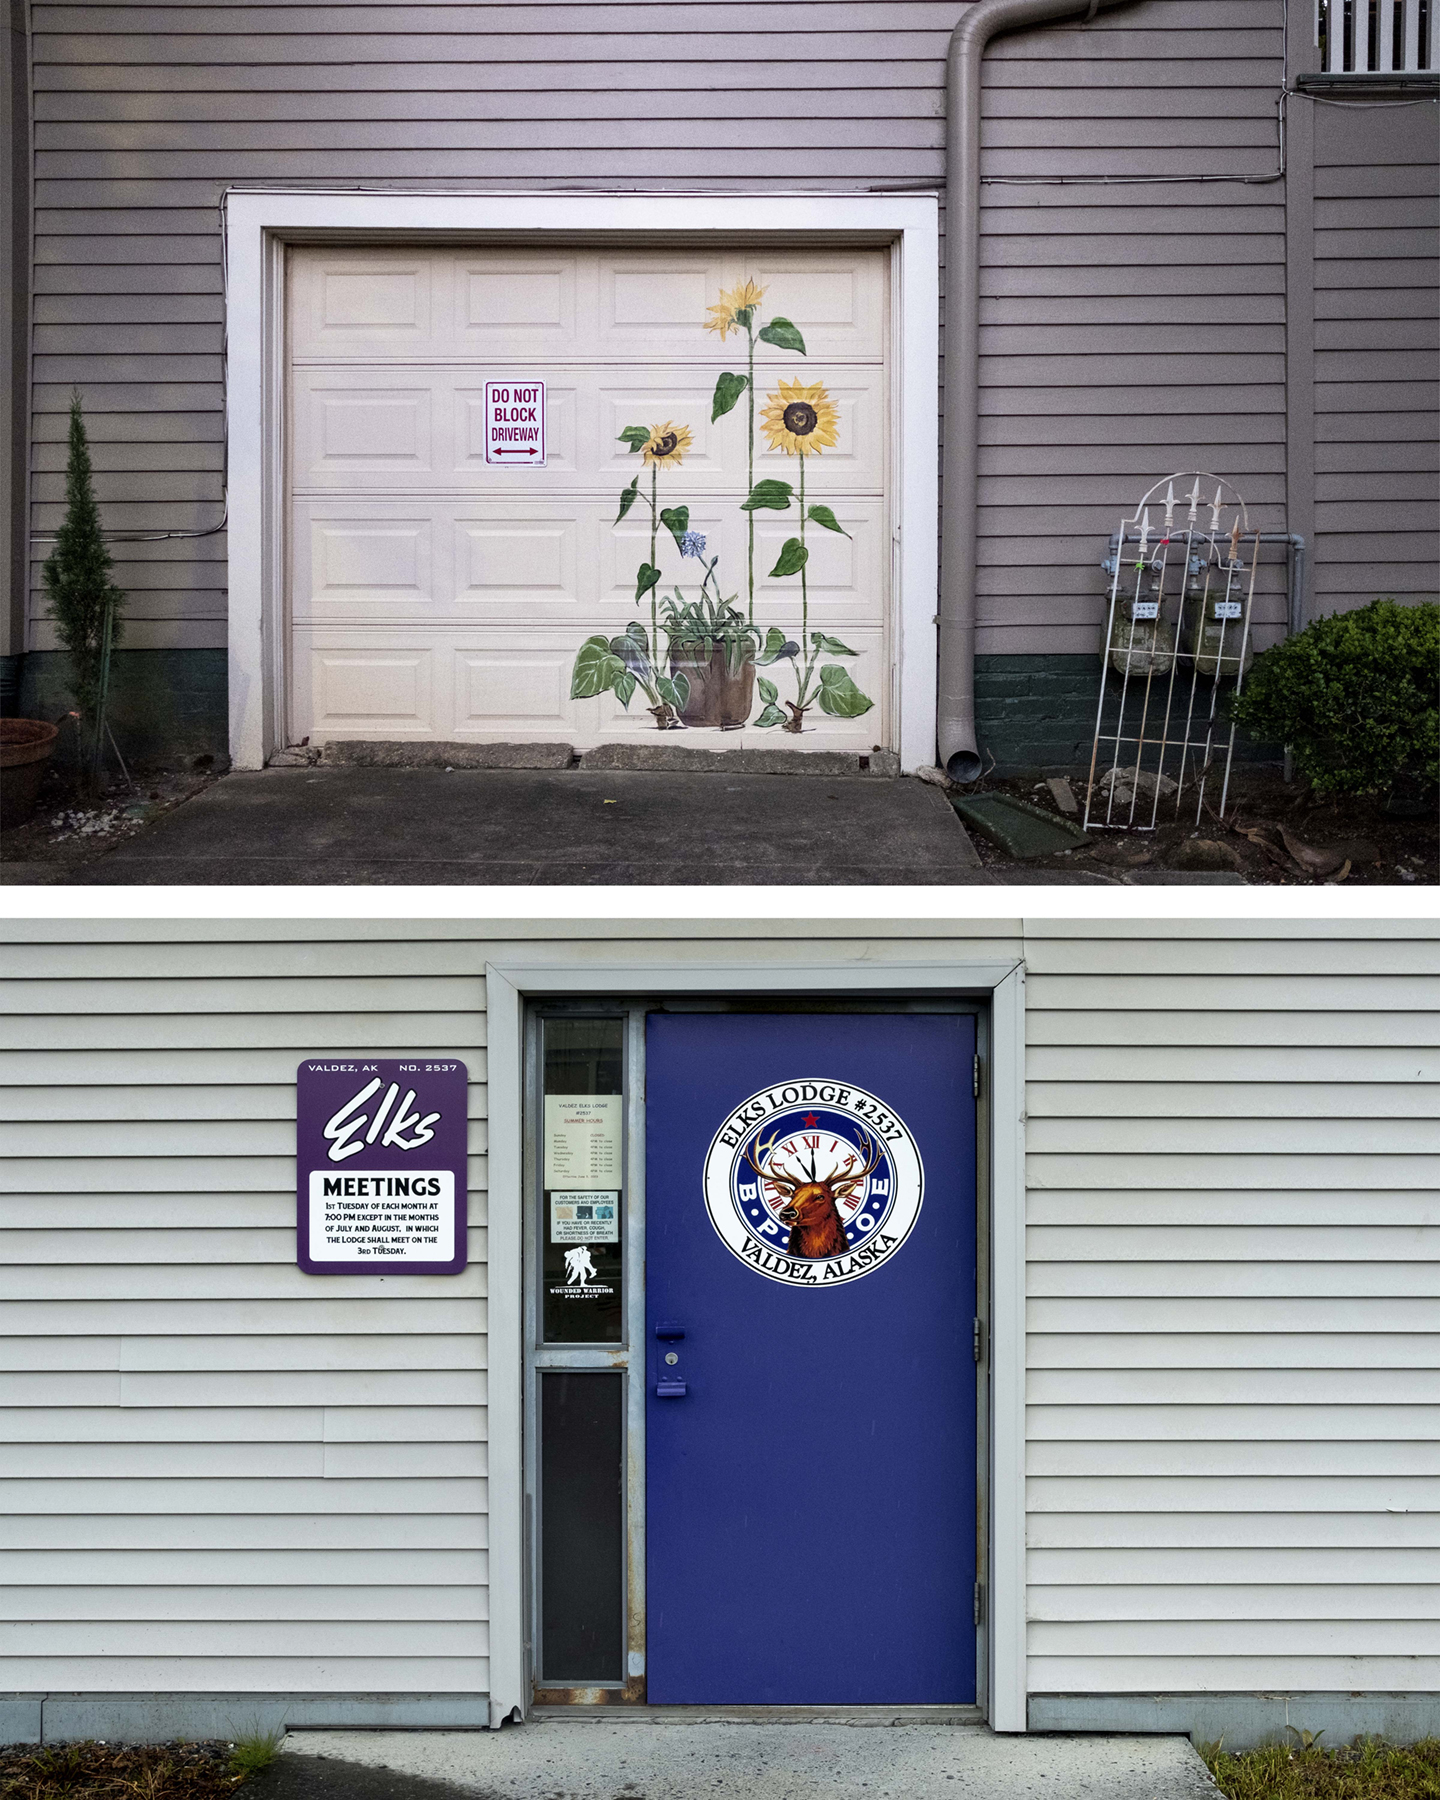 A garage door painted with flowers, a blue door for the Elks club, courtesy of the artist